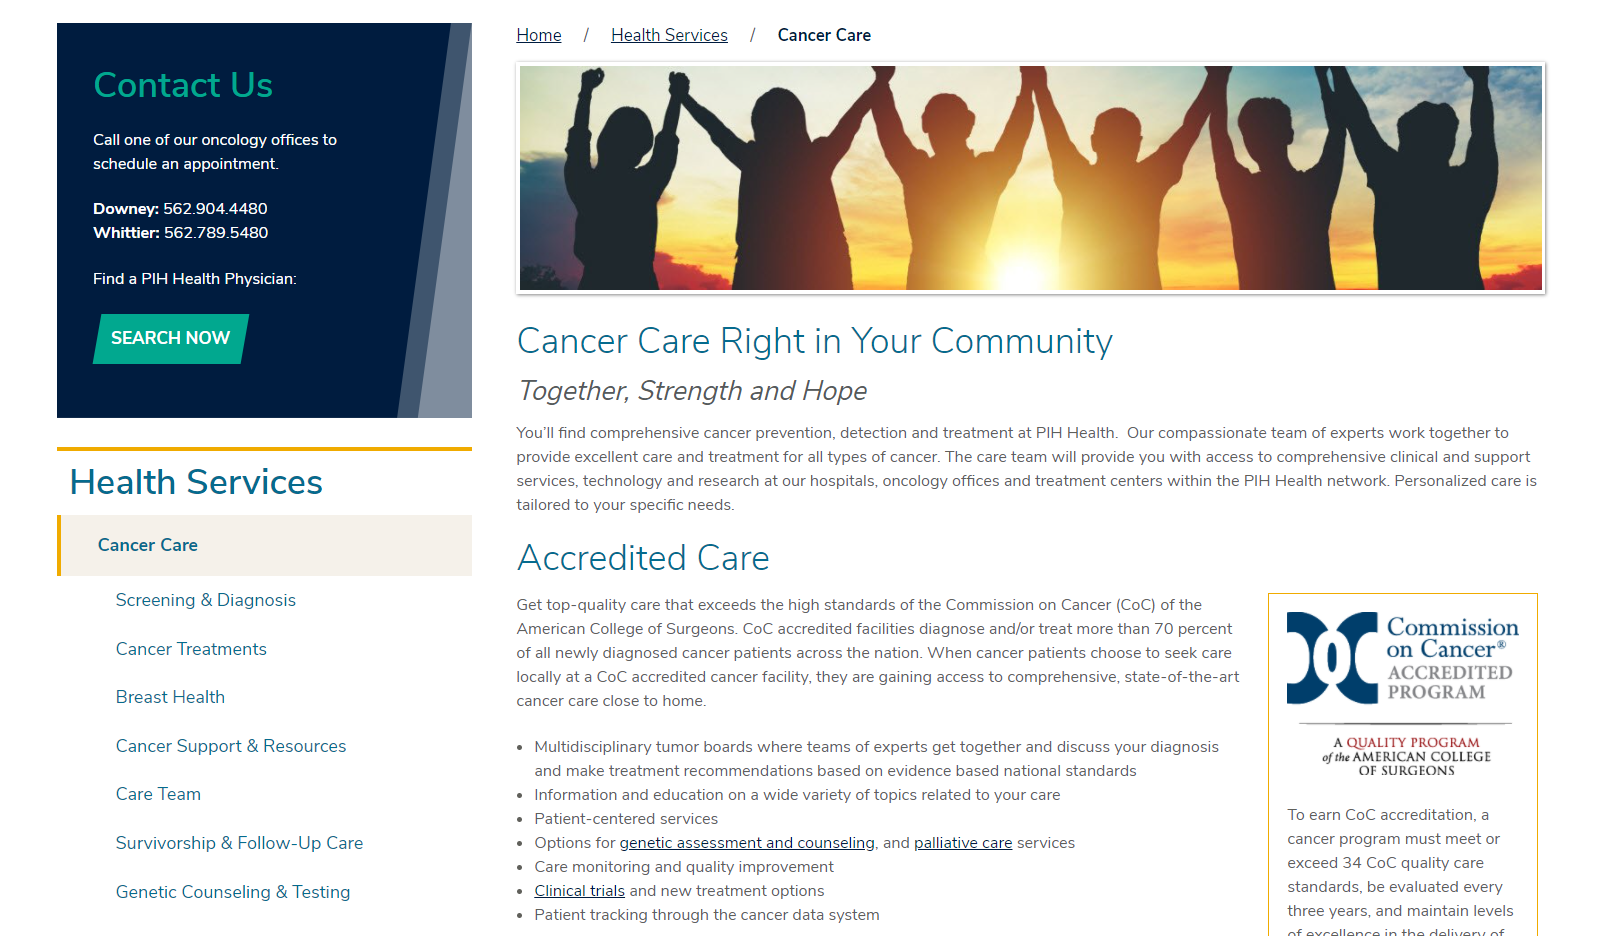 screenshot of PIH Health's cancer care section